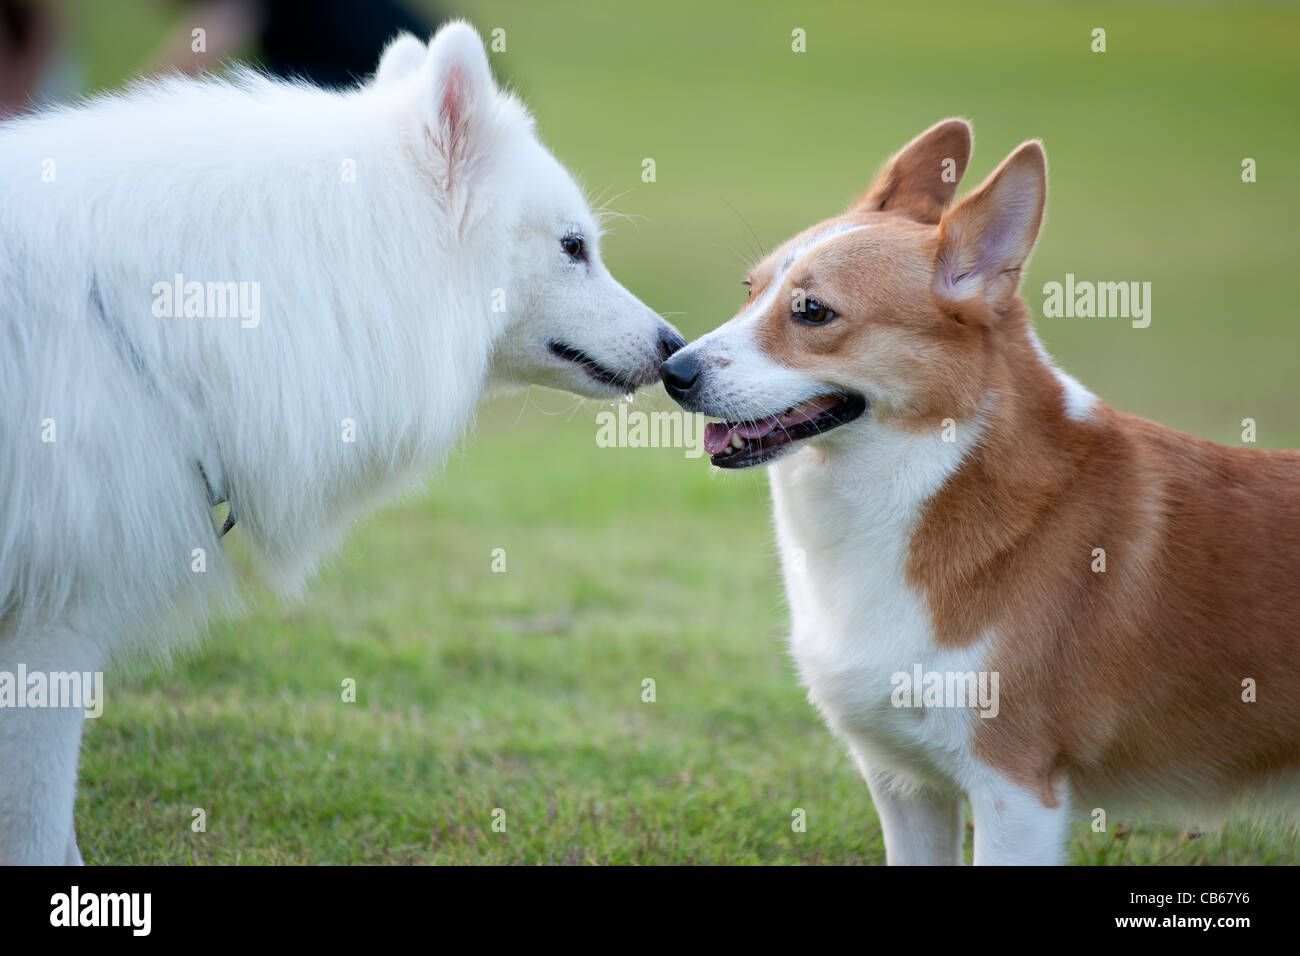 Two dogs ,Samoyed and Welsh Corgi, playing together on the lawn Stock Photo